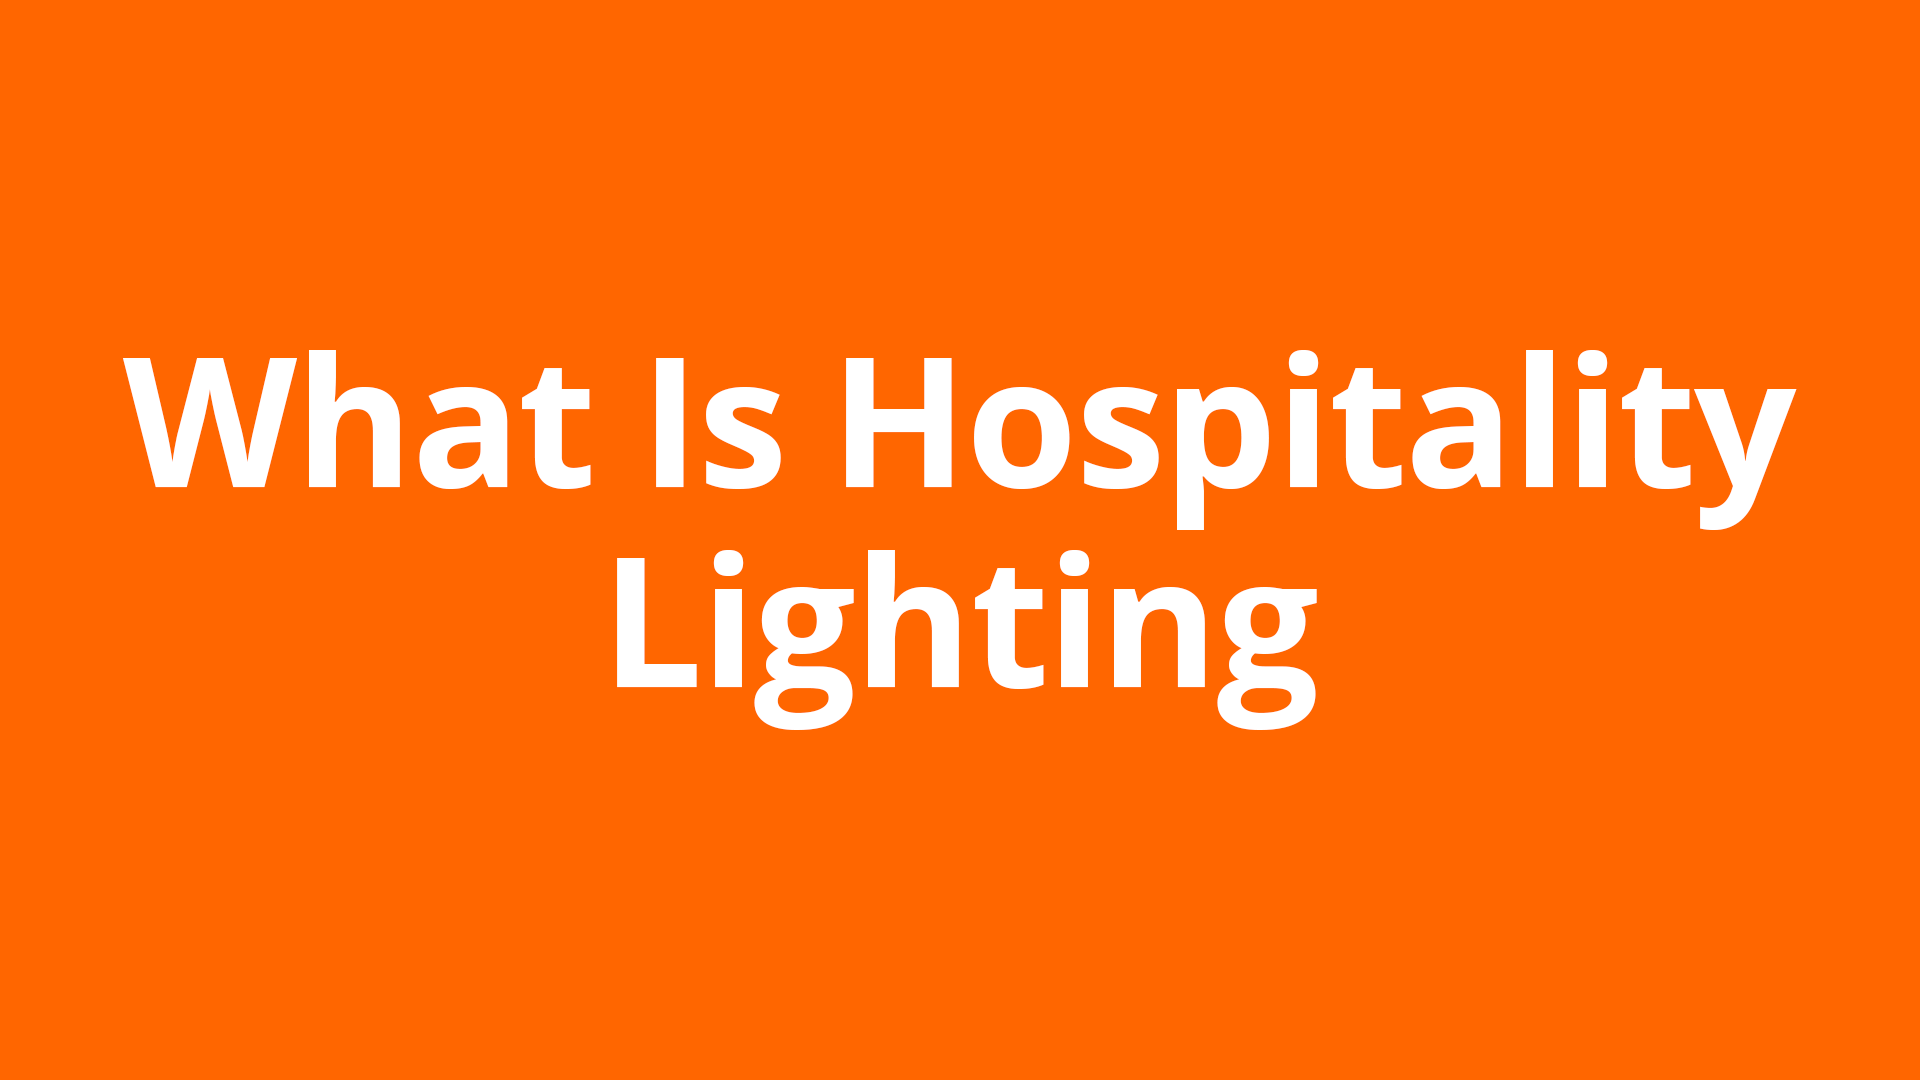 What Is Hospitality Lighting